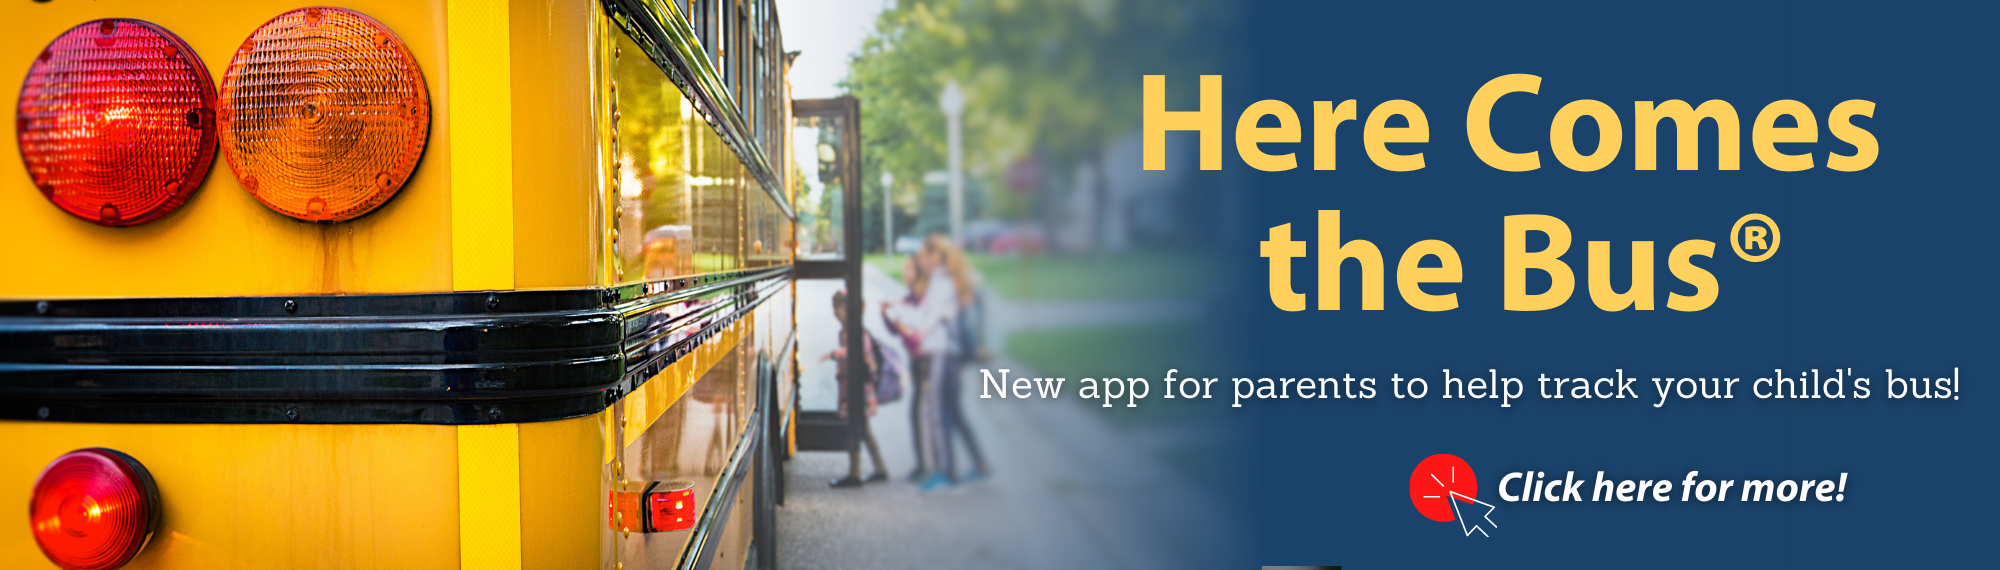 Here Comes The Bus app information